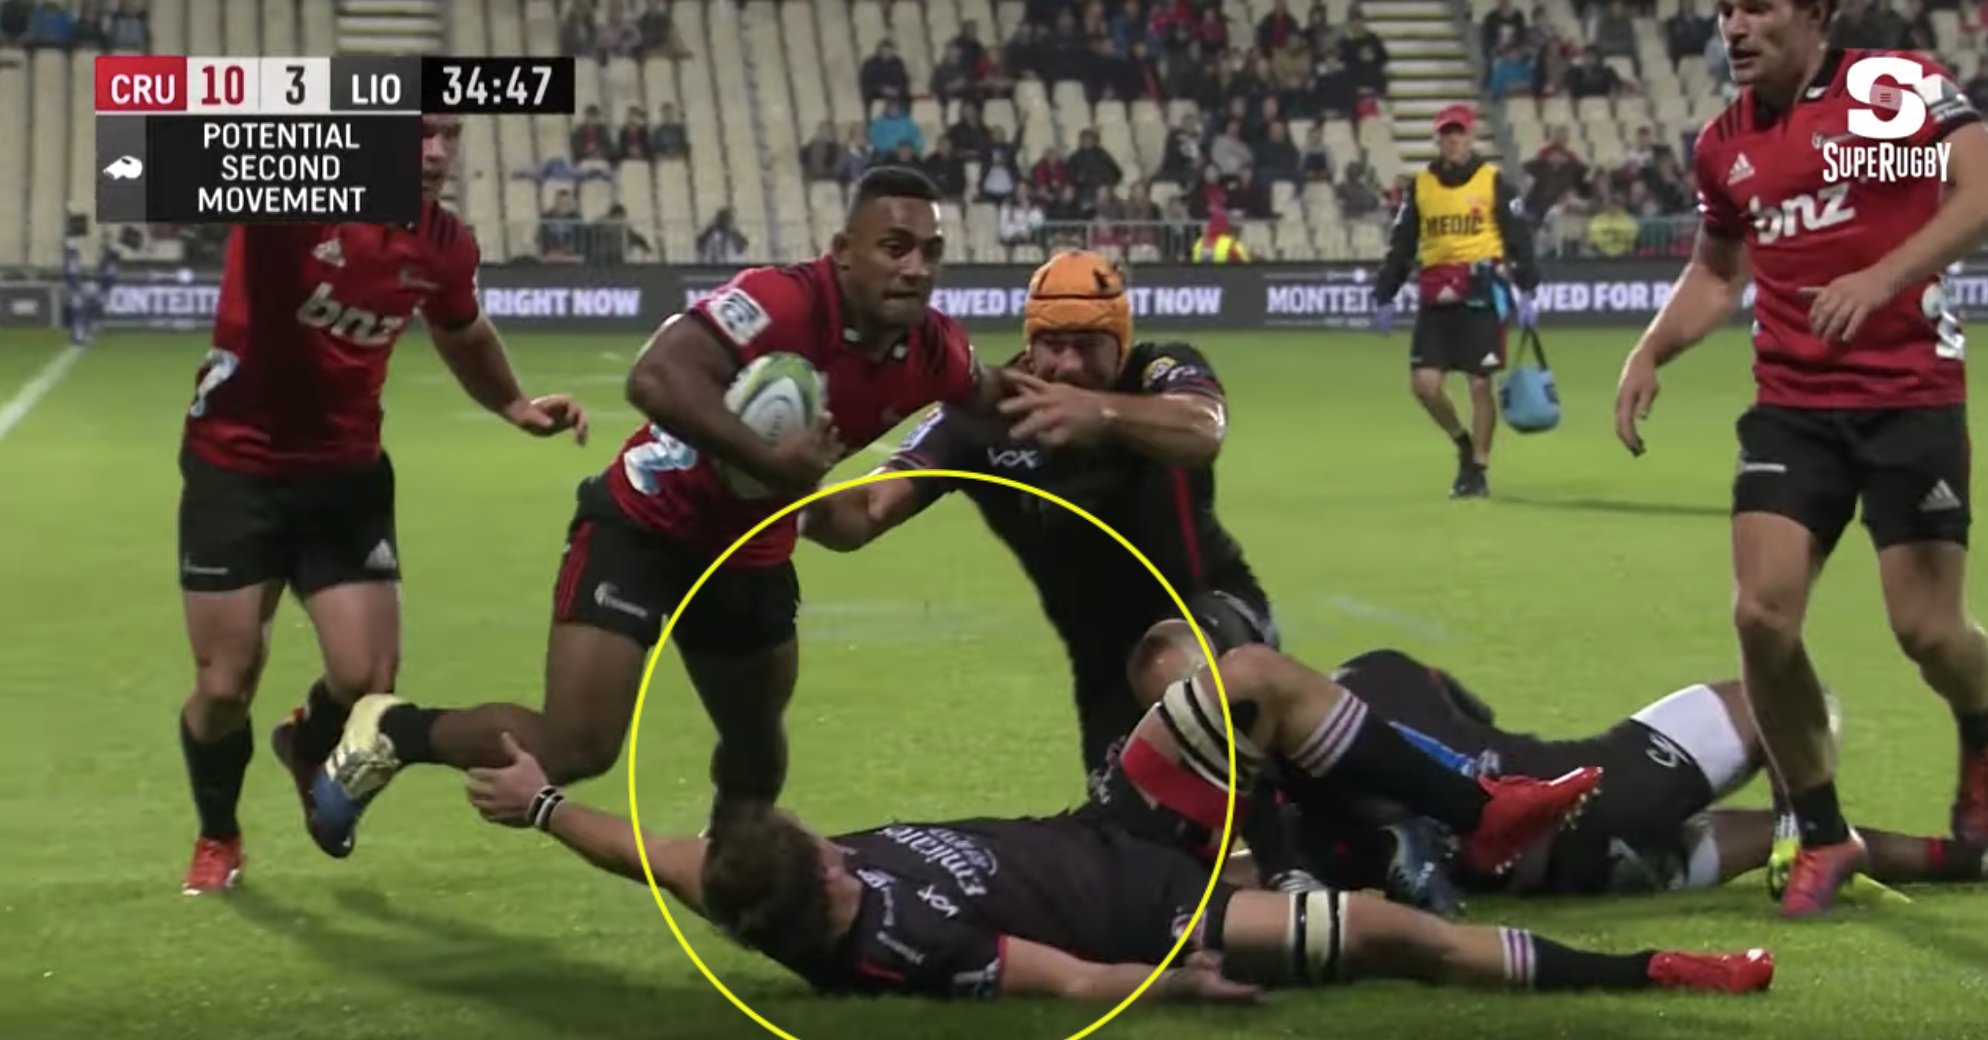 WATCH: Crusaders winger absolutely FLATTENS Kwagga Smith in try scoring rampage